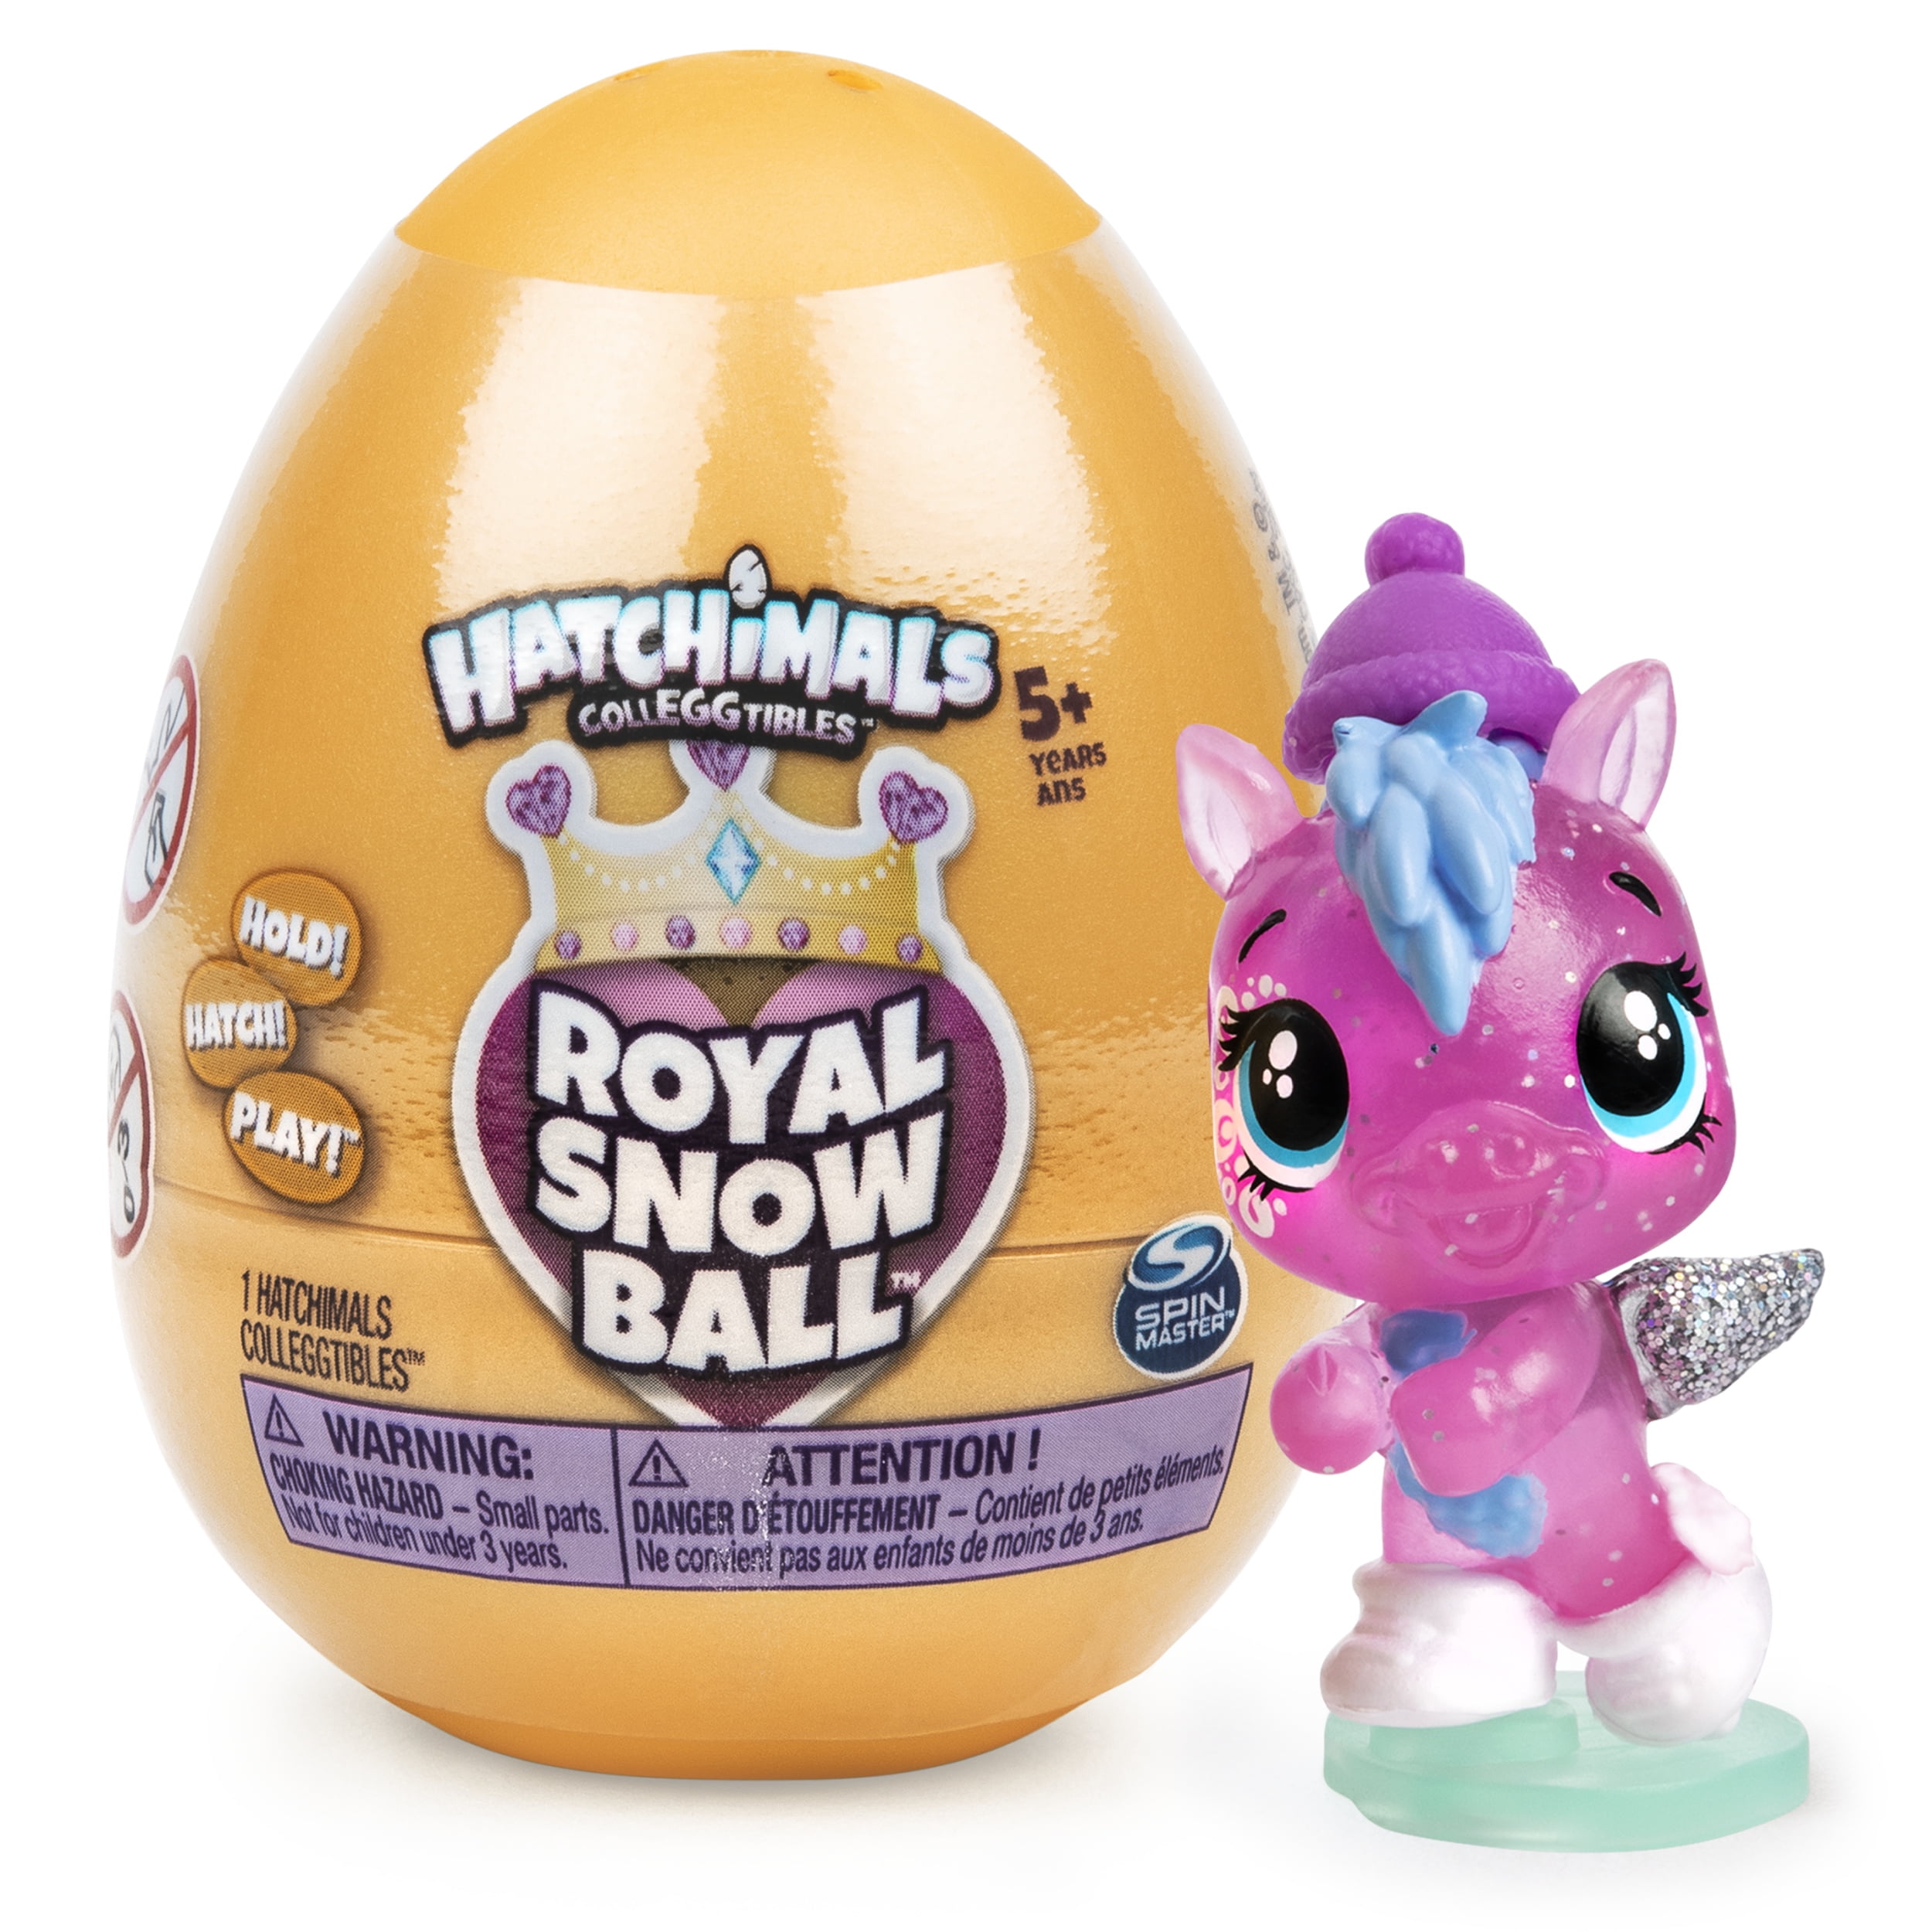 Hatchimals Pixies Royal Snowball Mystery Egg Magical Snow Ball for sale online